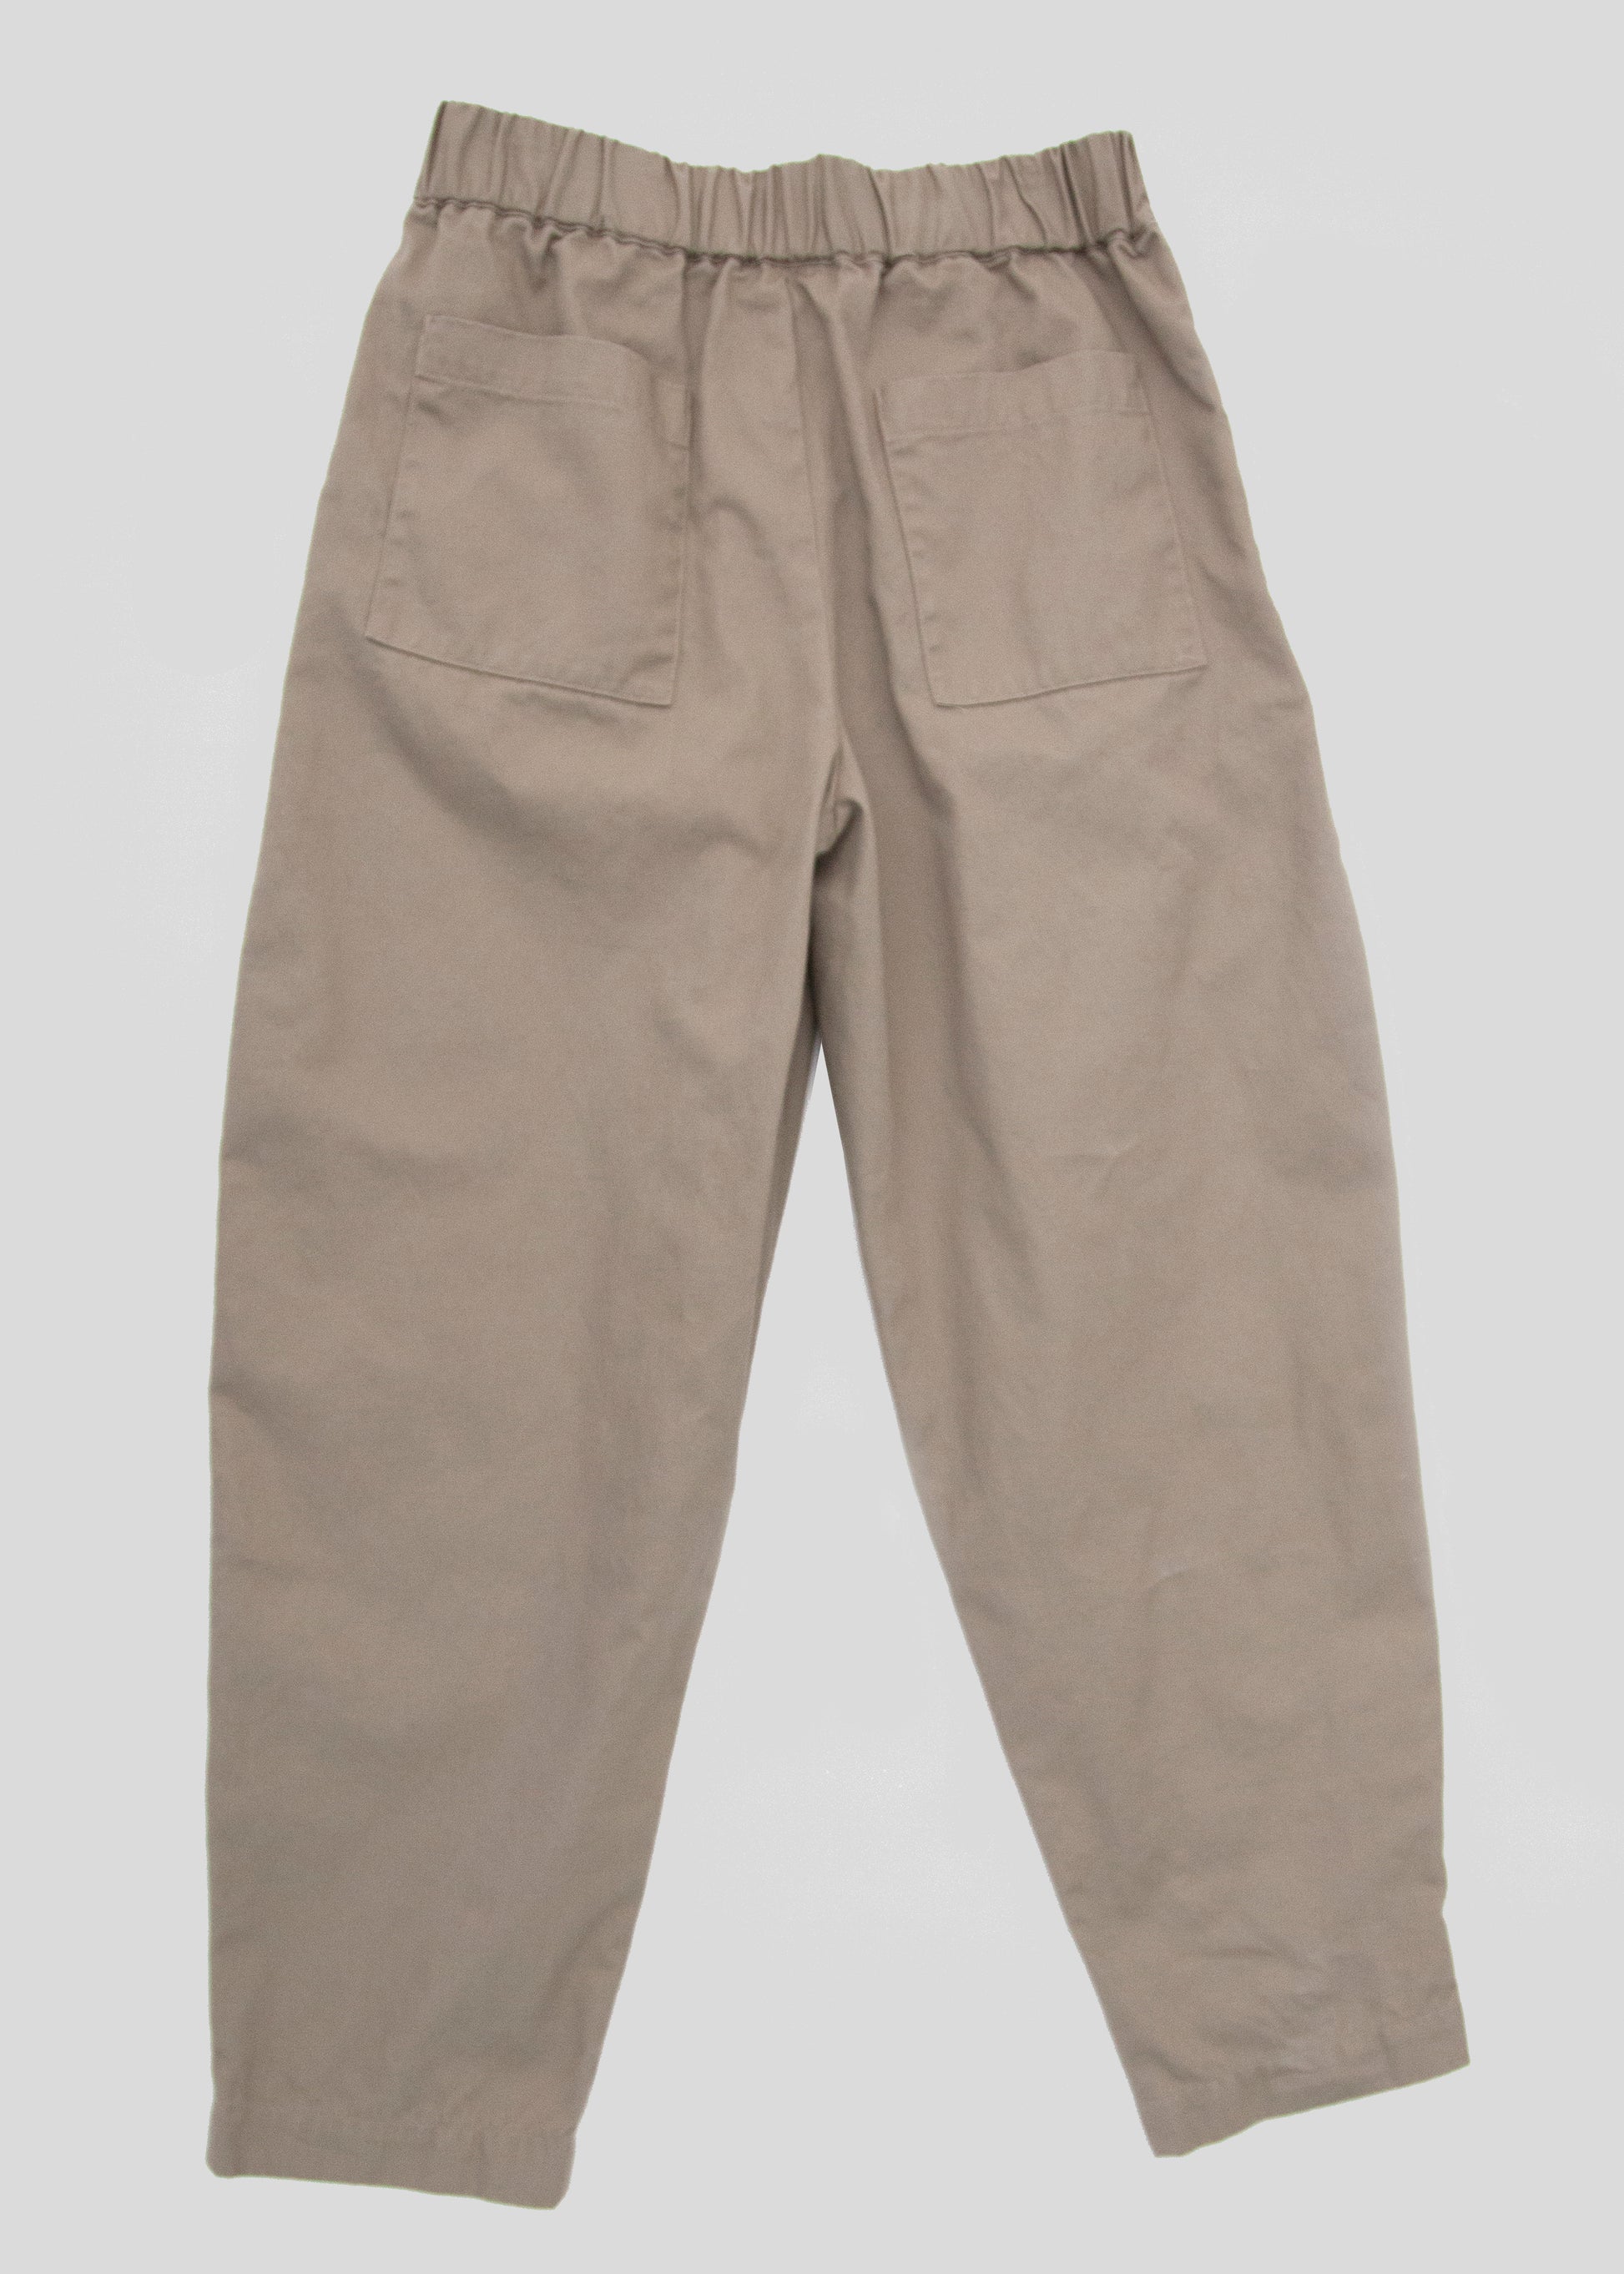 back flat lay of gathered pants in color khaki 